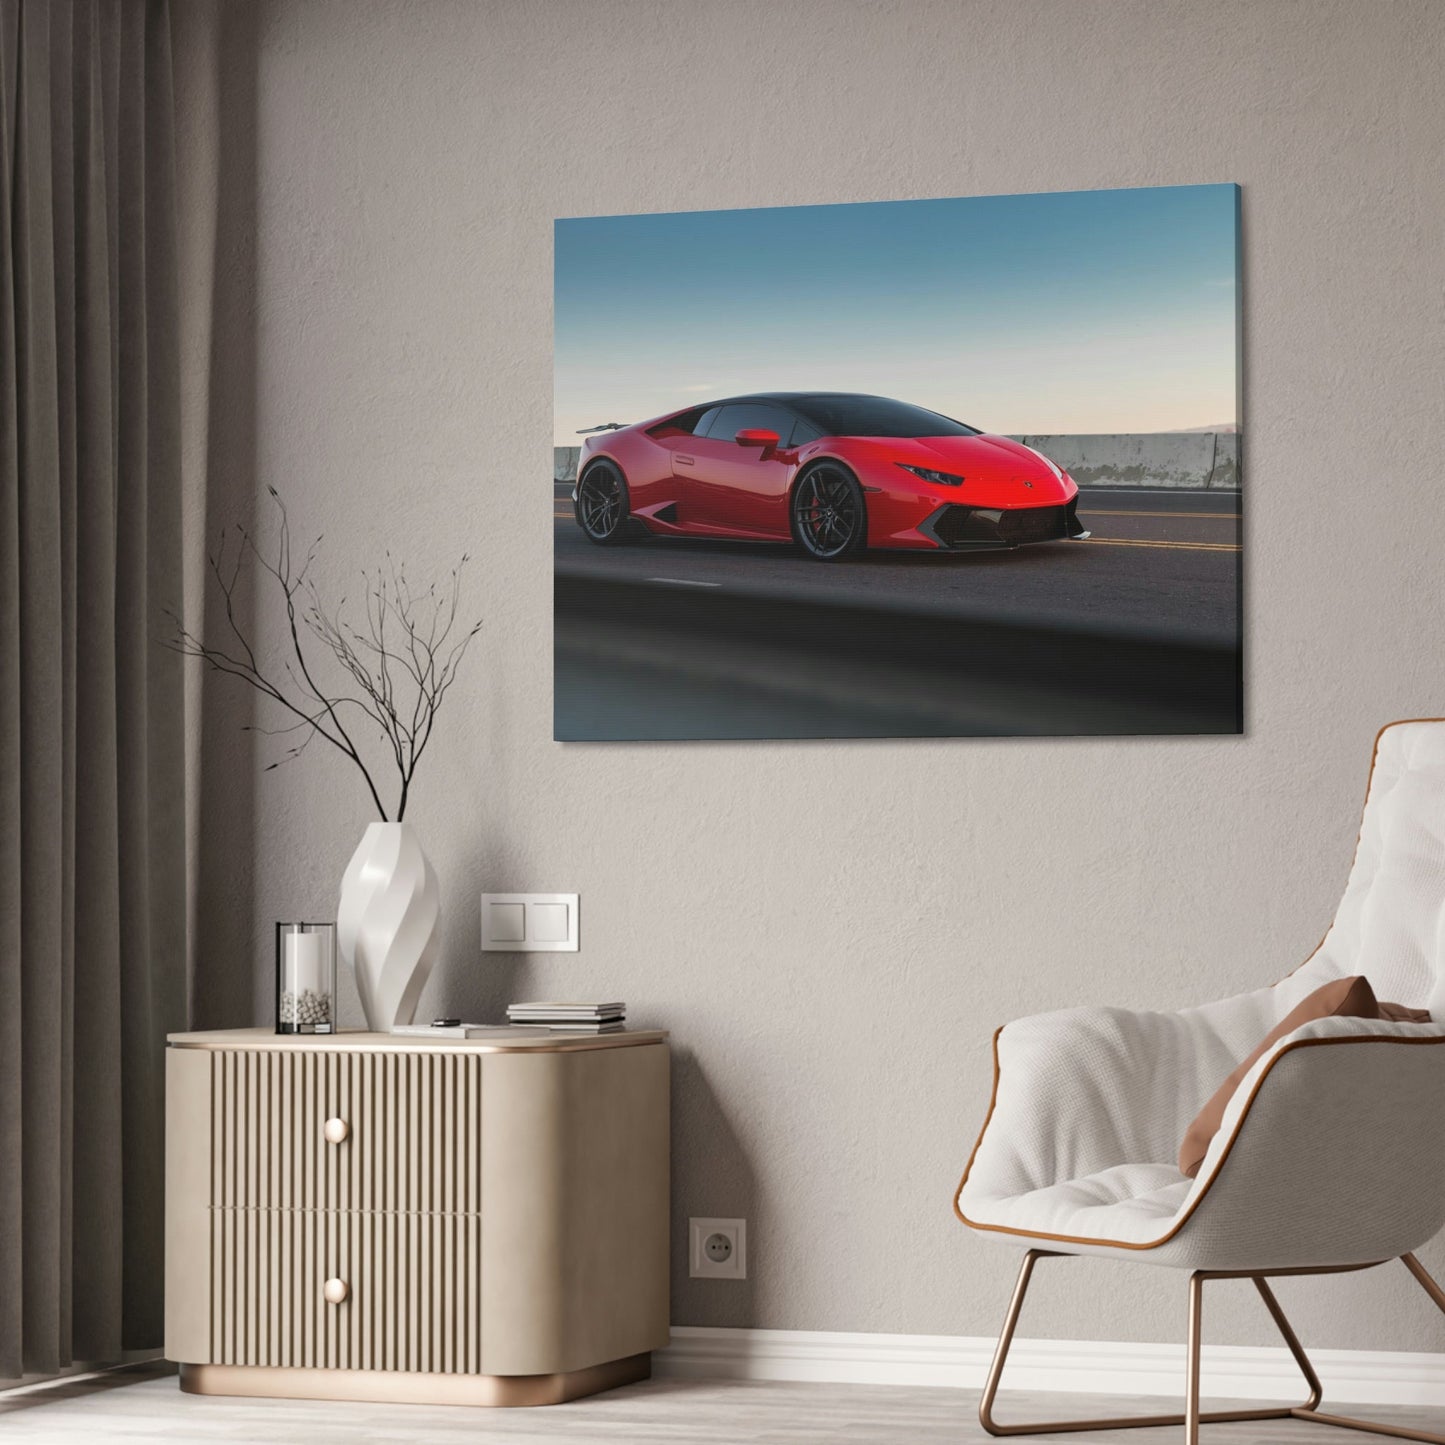 Racing into the Future: Lamborghini Canvas & Poster on High-Quality Print